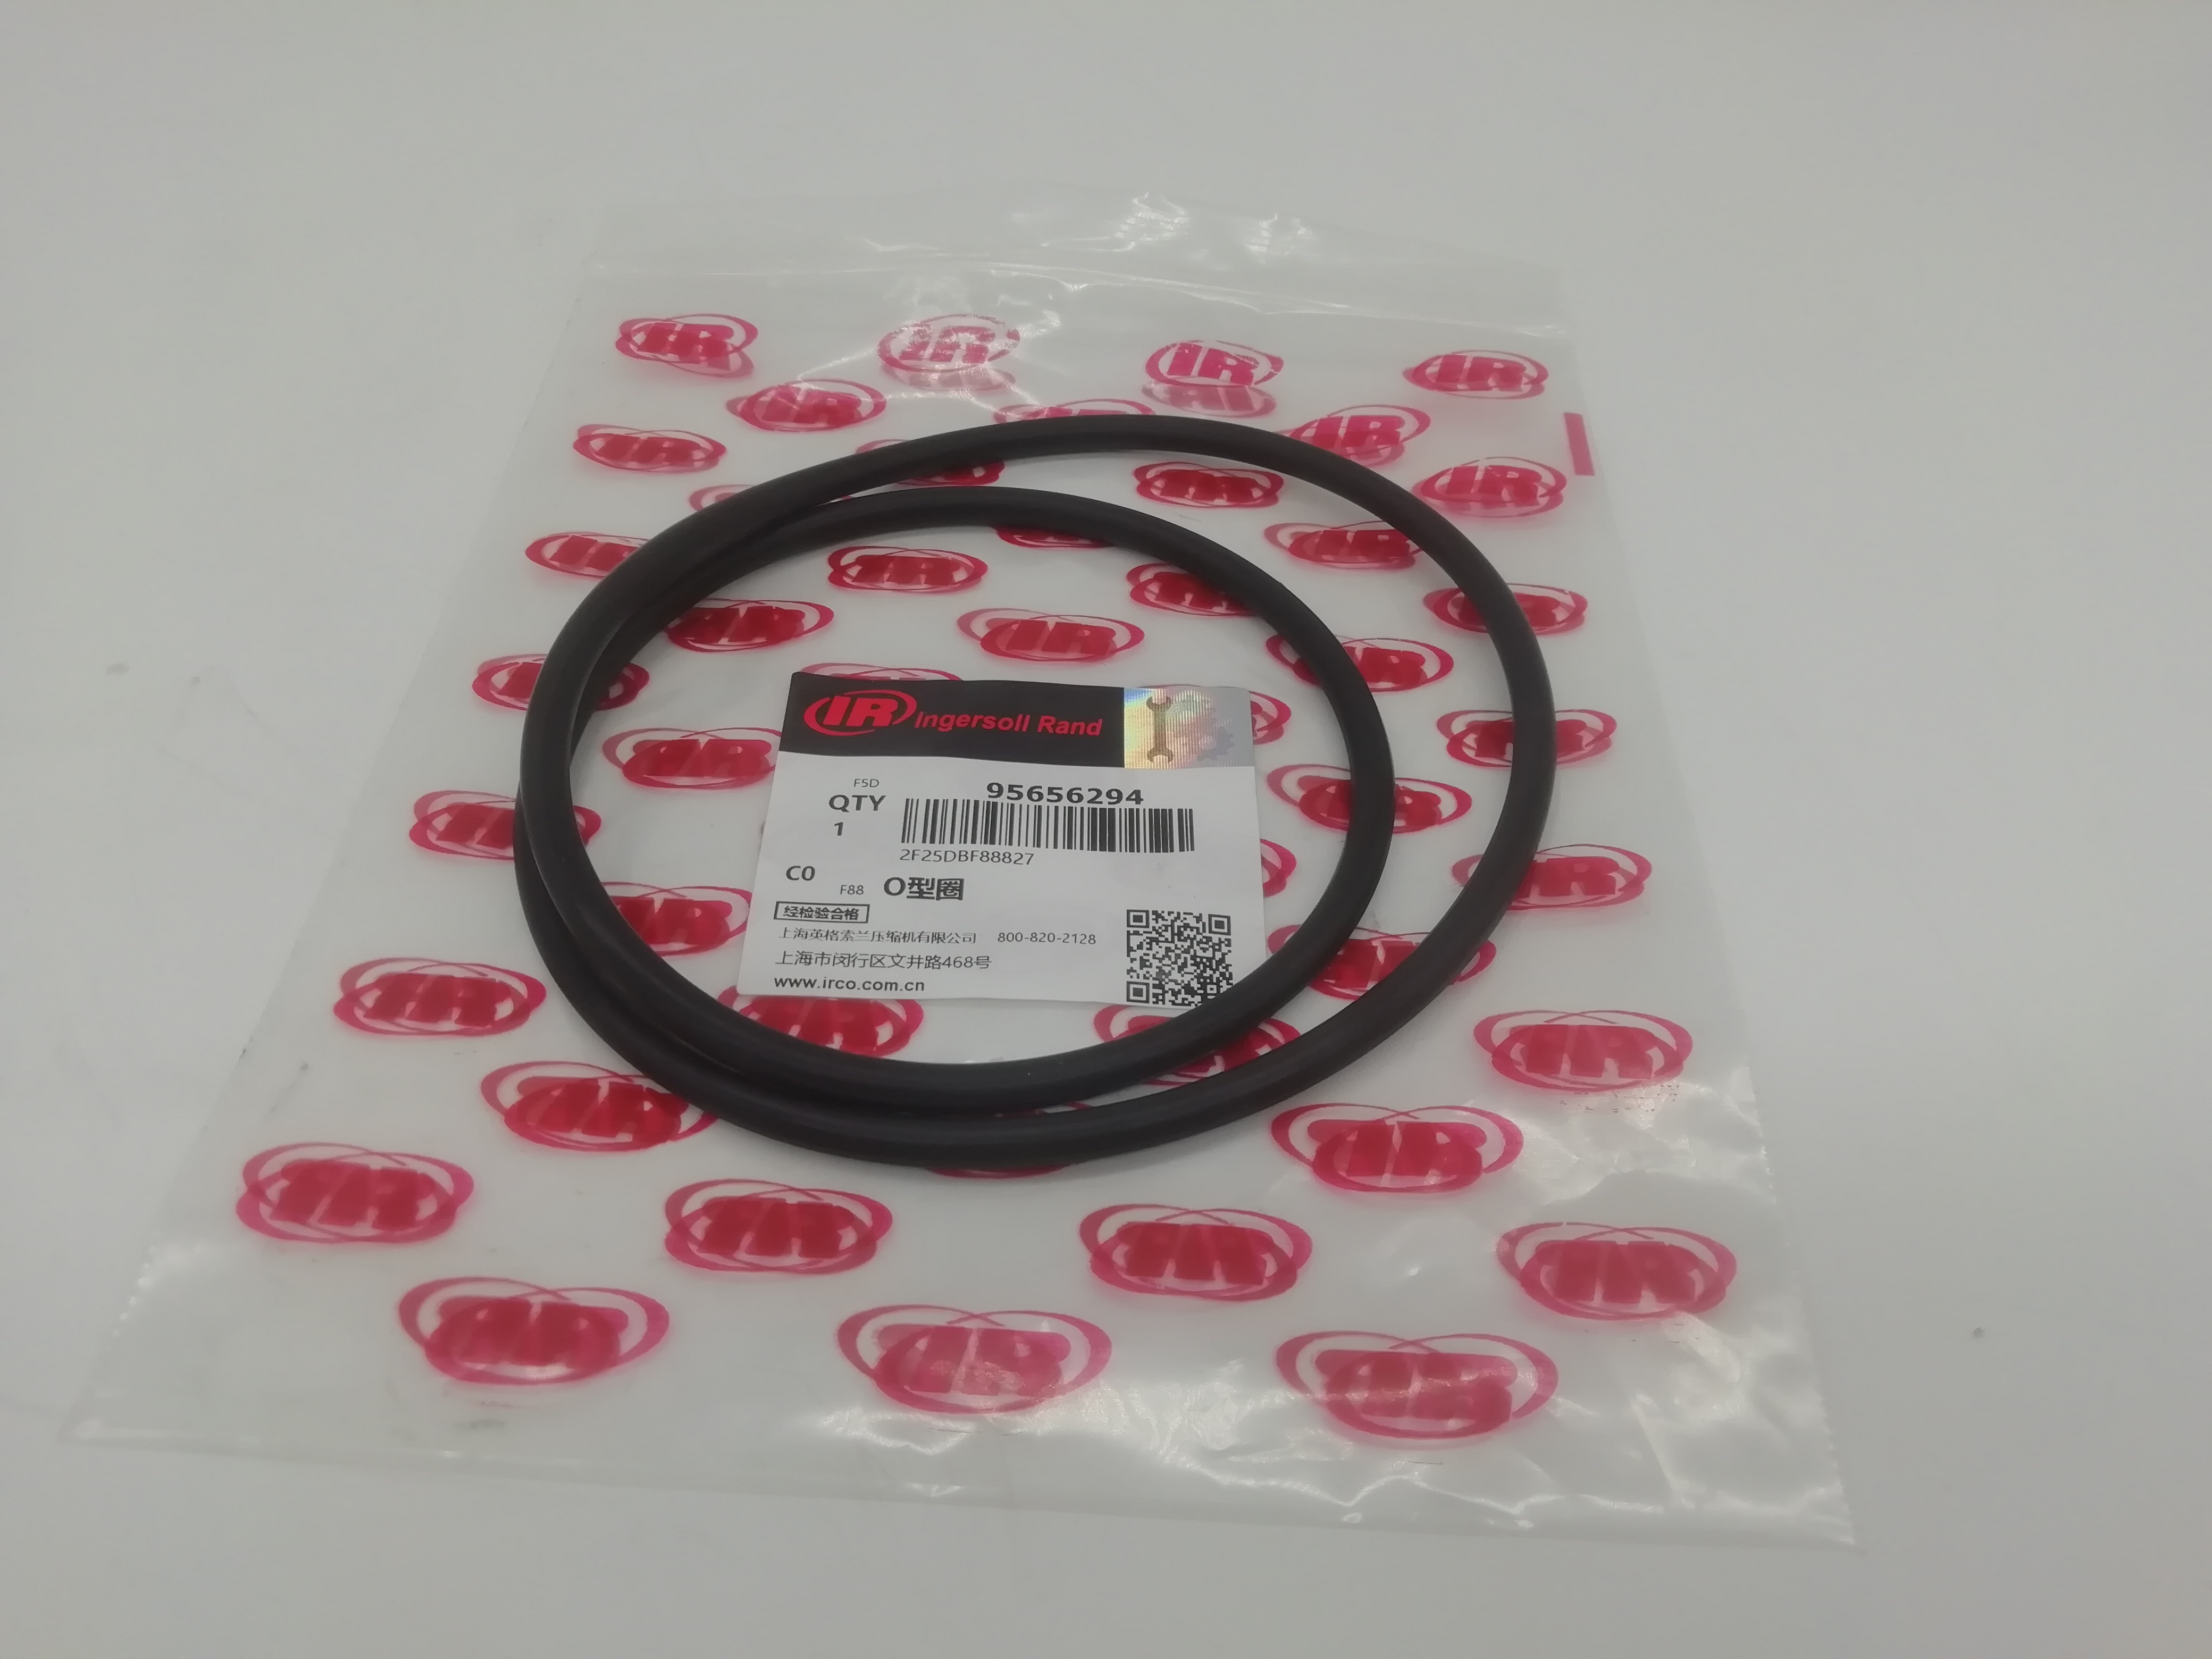 Ingersoll Rand Spare Parts O-ring 95656294